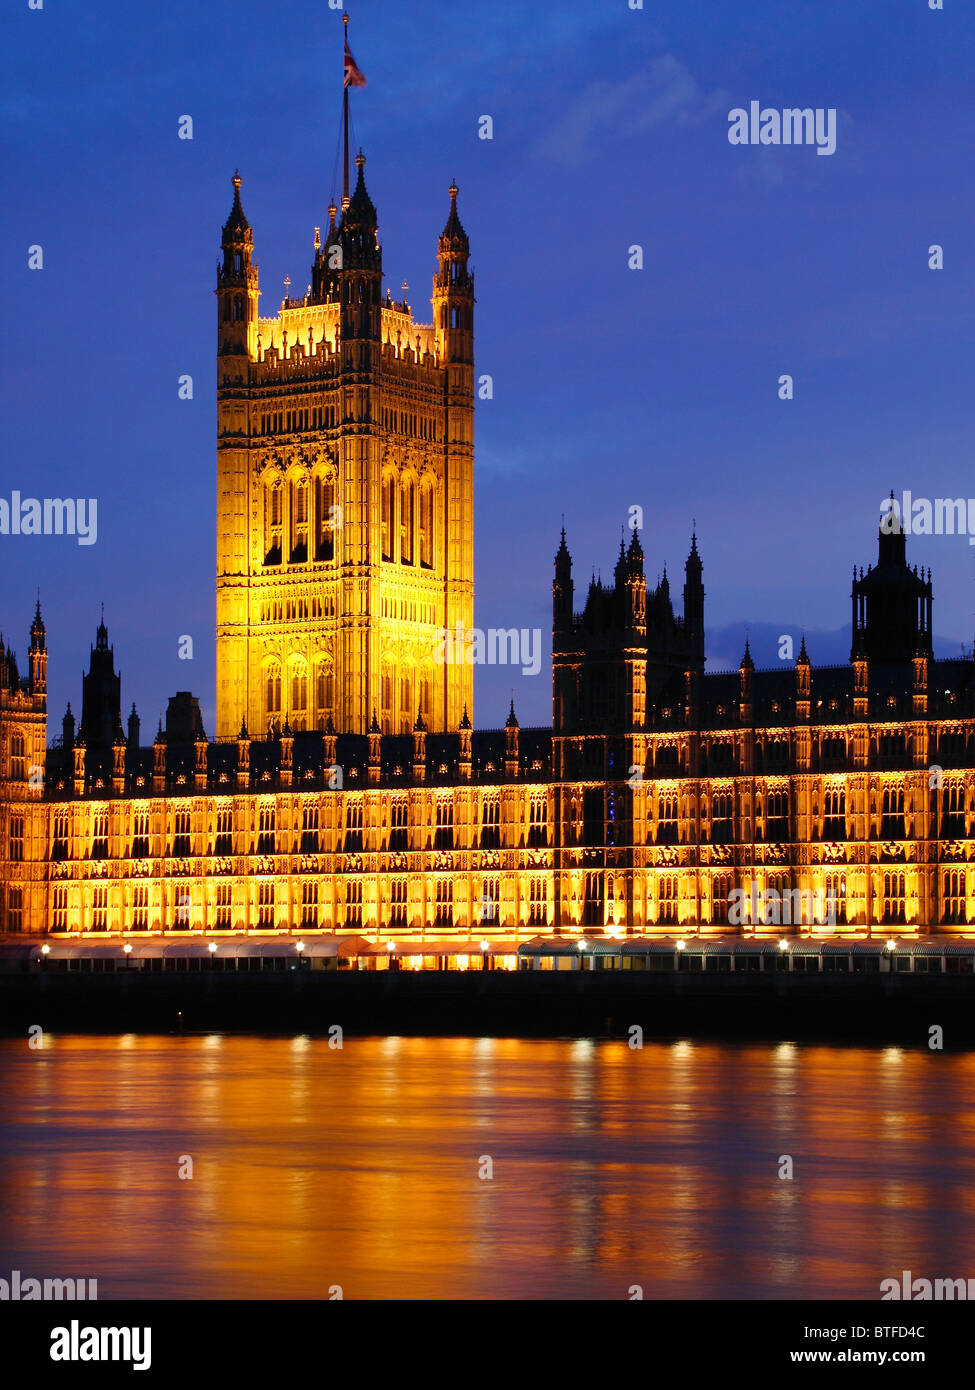 The tower of the British parliament building at dusk lit by lights with the blue skies in the background. Stock Photo